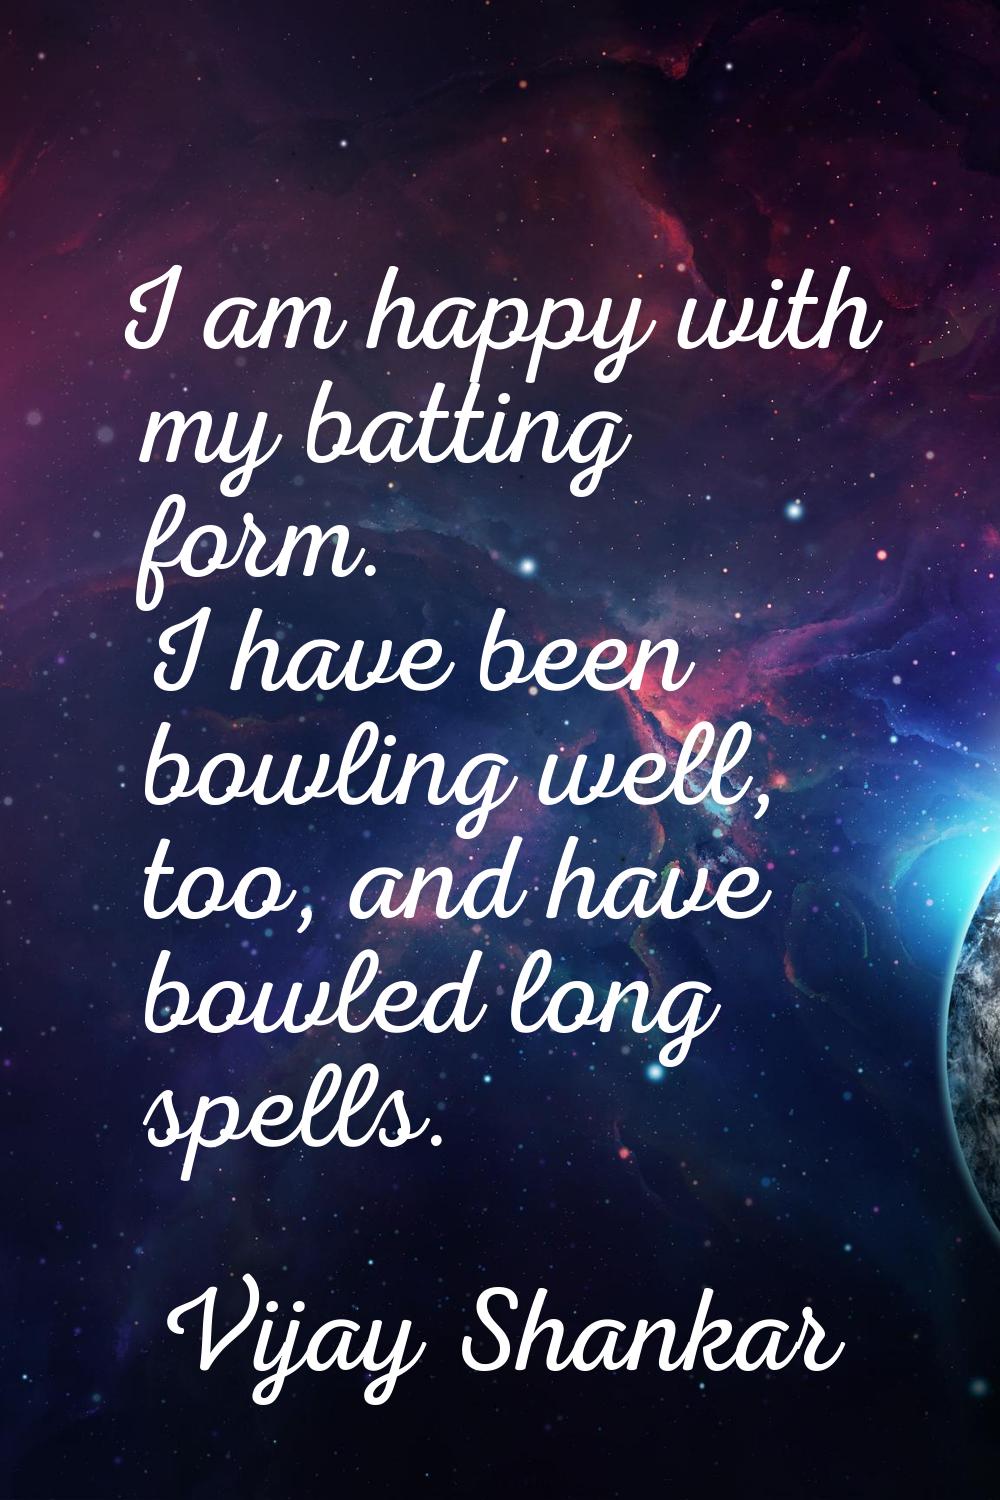 I am happy with my batting form. I have been bowling well, too, and have bowled long spells.